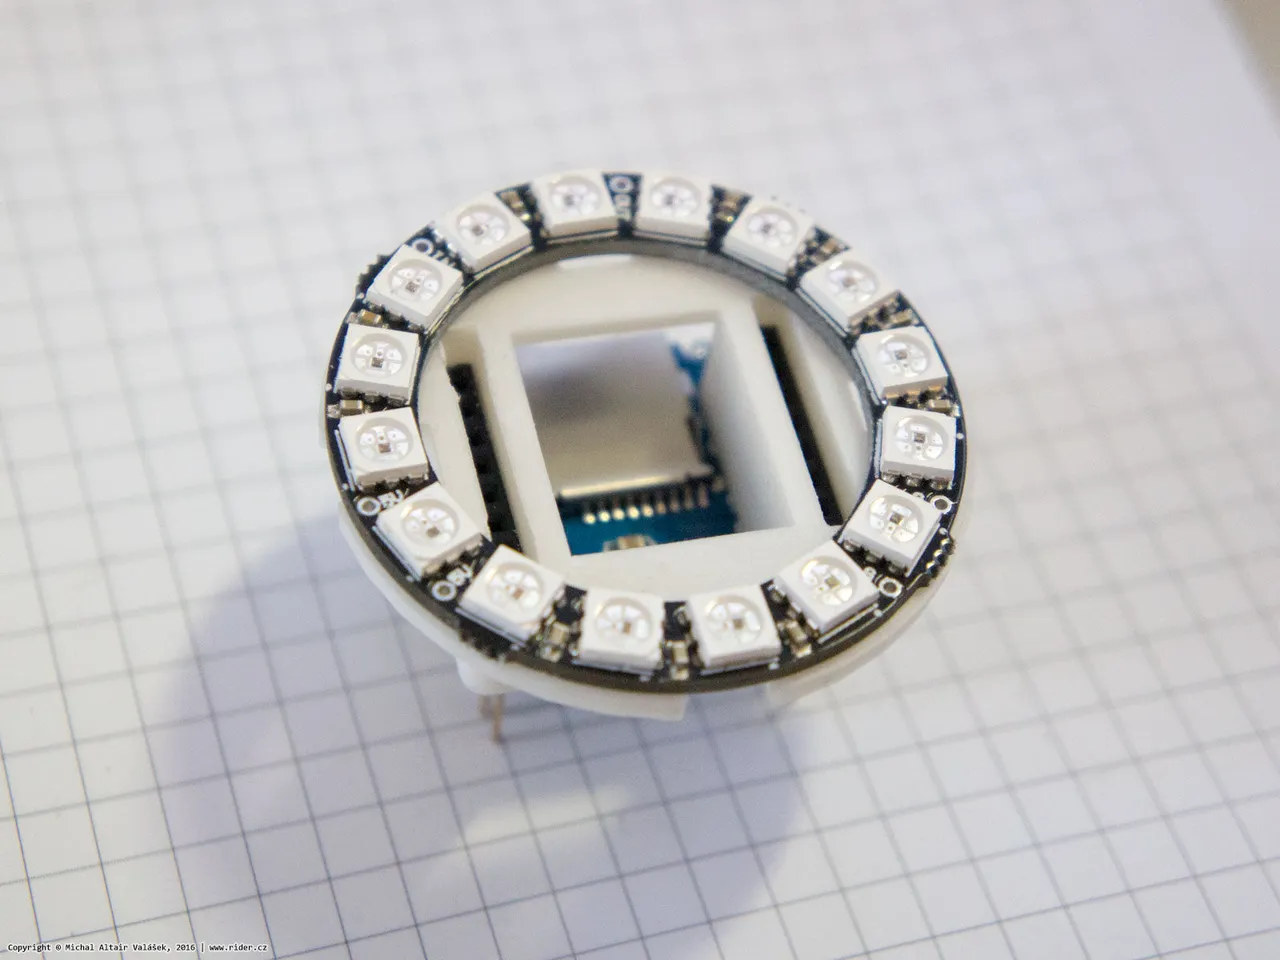 DESIGNING A CLOCK USING REAL-TIME-CLOCK AND NEOPIXEL RING ON ARDUINO  LILYPAD | by Karkhana Makerspace | Medium